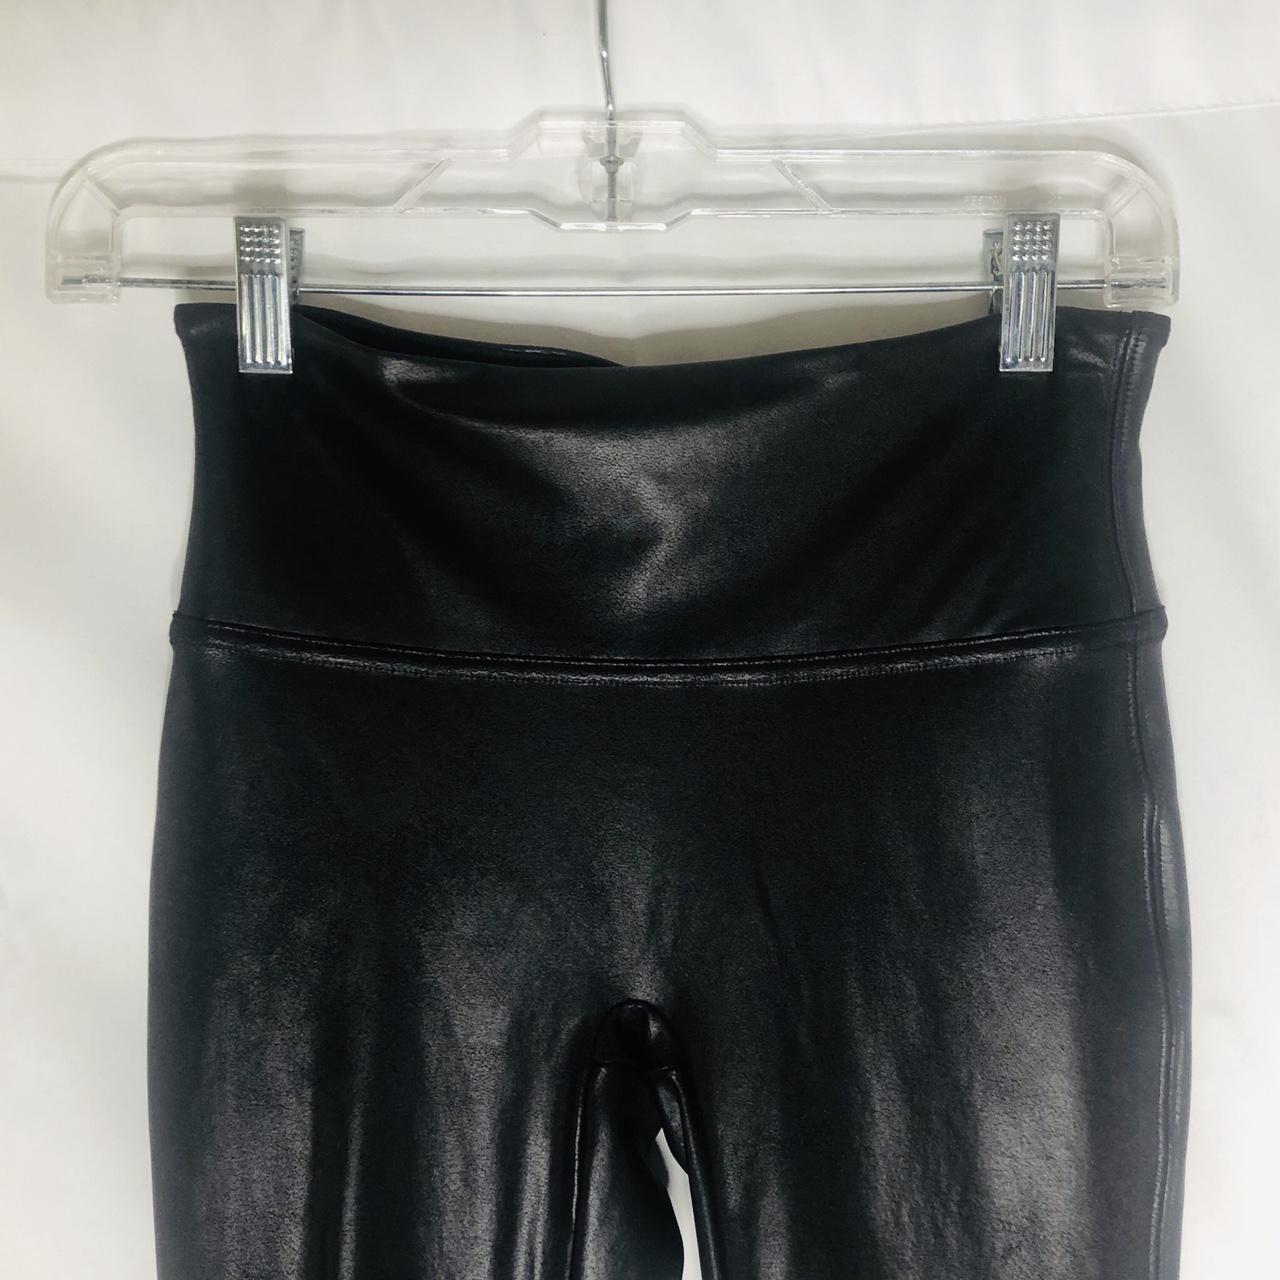 Product Image 4 - NWOT Spanx Faux-Leather Leggings

Features a